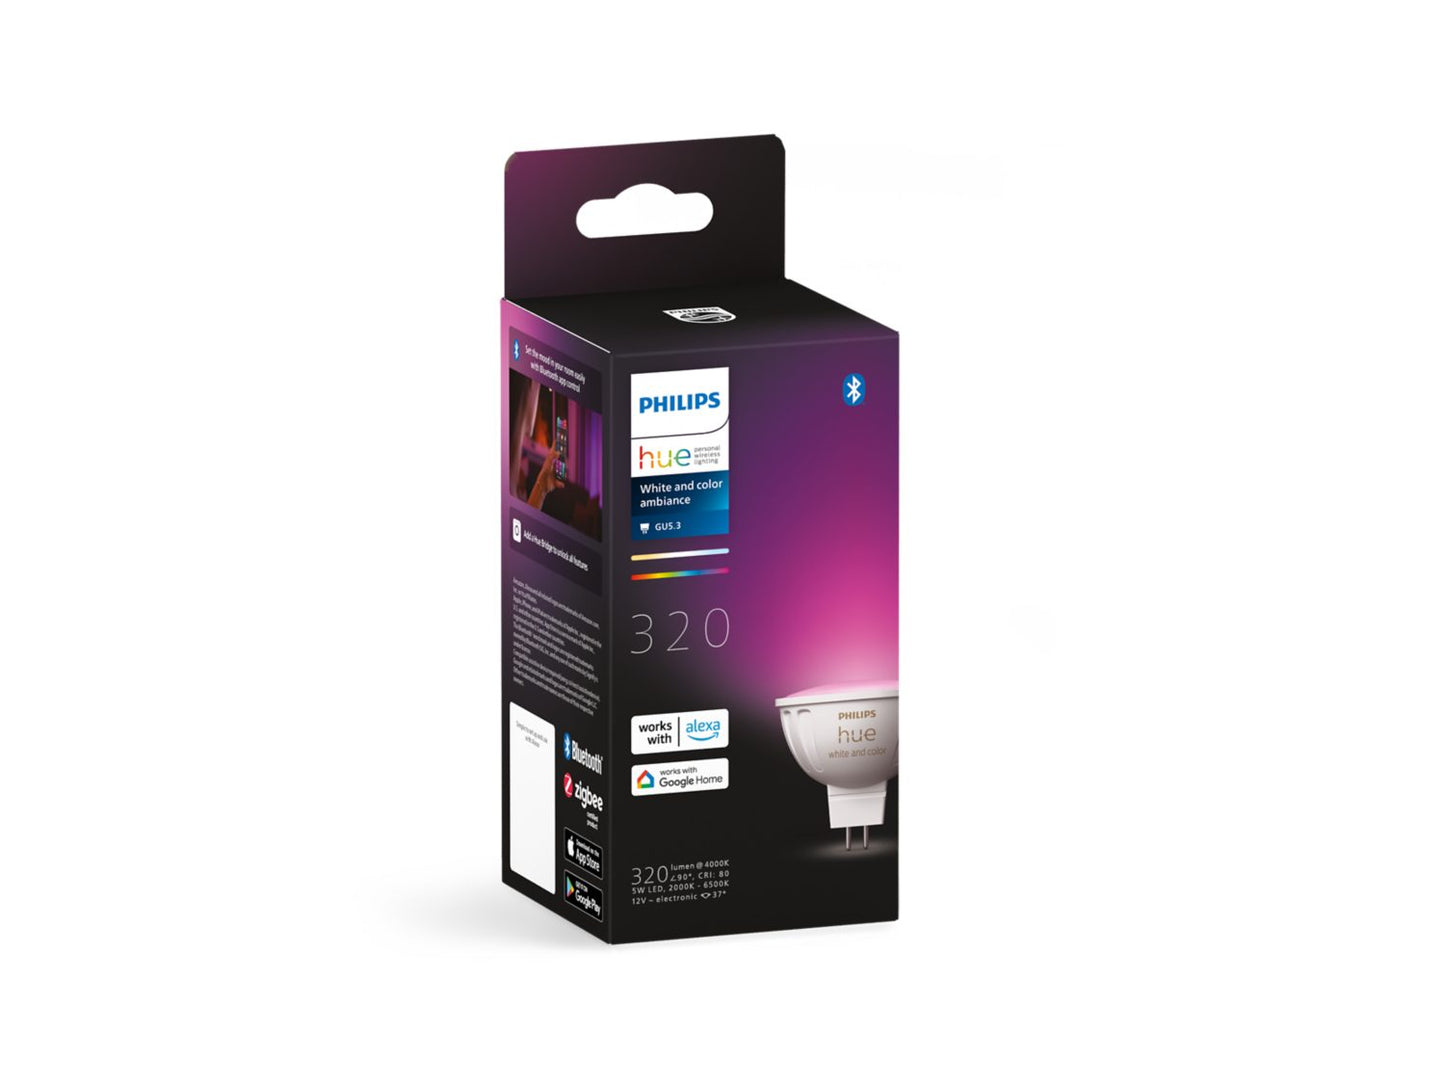 Philips Hue MR16 Globe - White and Colour boxed